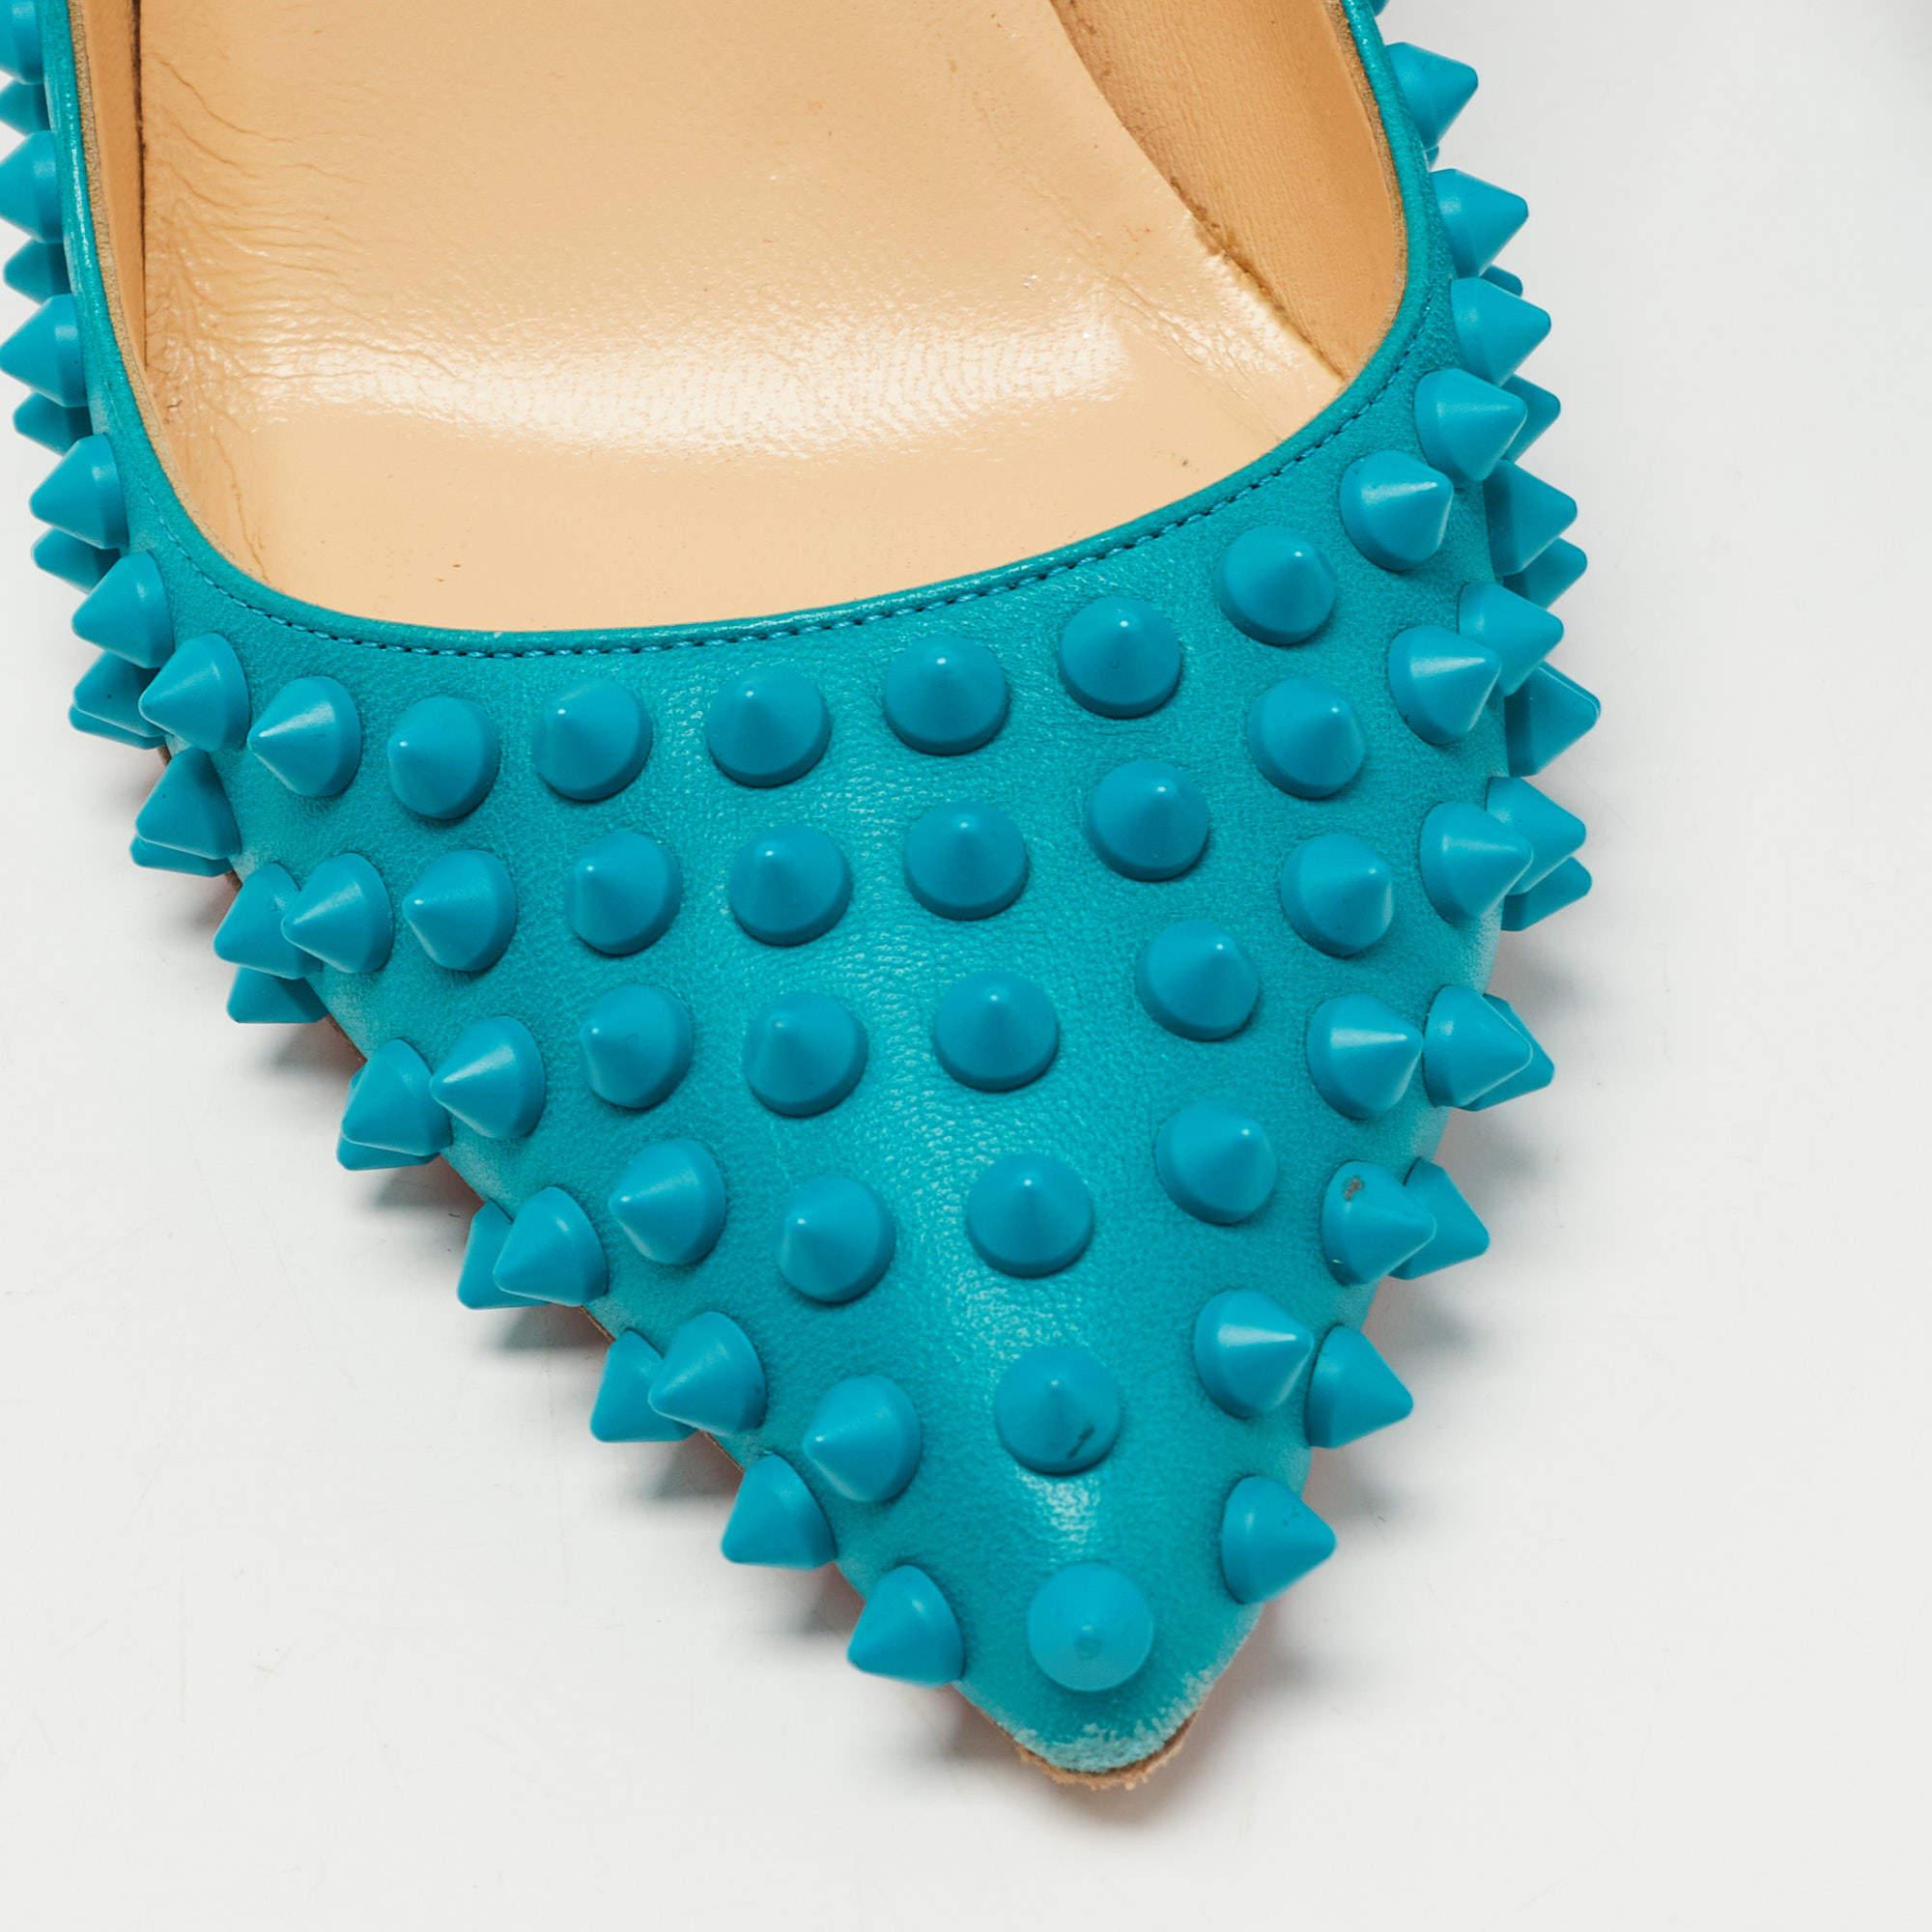 Christian Louboutin Blue Leather Pigalle Spikes Pumps Size 37.5 For Sale 2